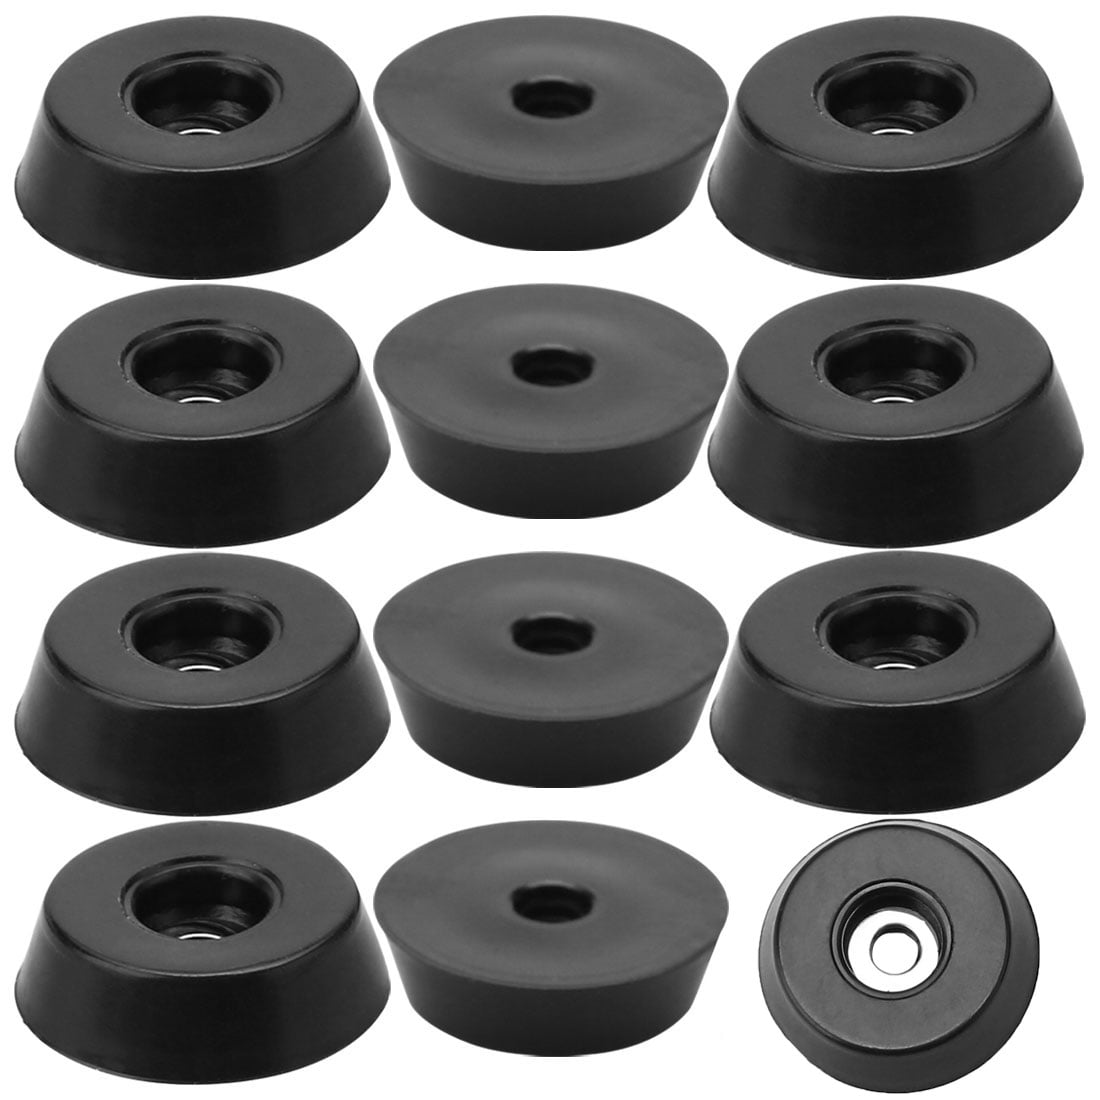 Uxcell 12pcs Rubber Feet Bumper Pads For Furniture Feet With Washer D18x15xh5mm